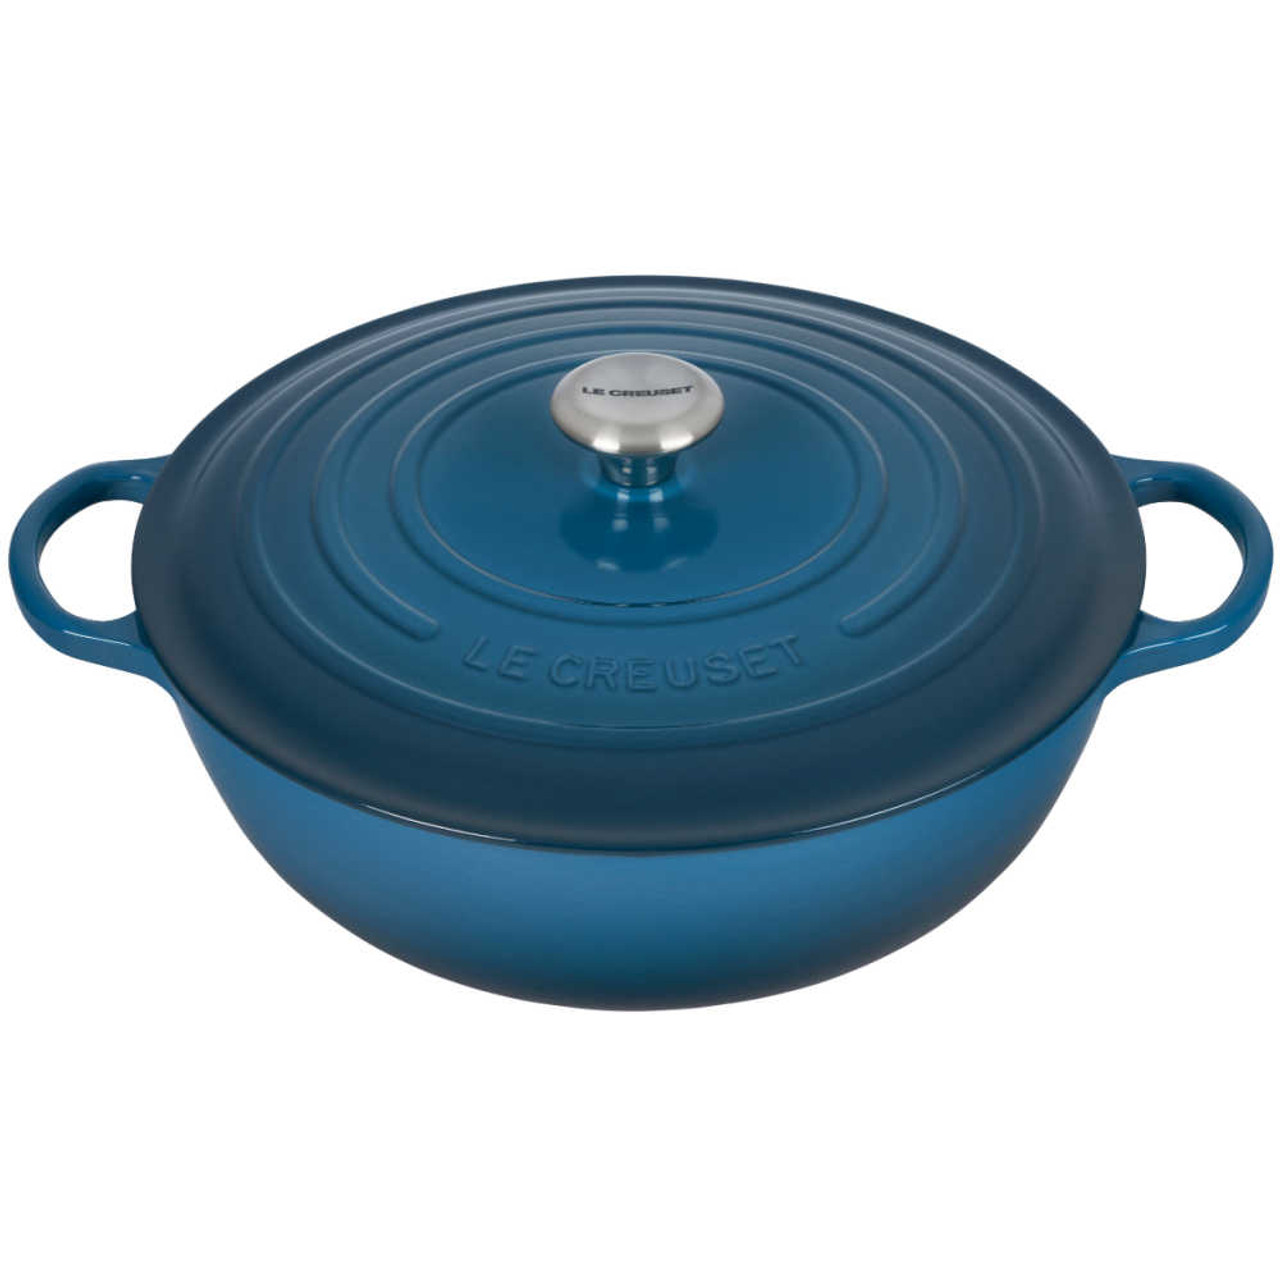 https://cdn11.bigcommerce.com/s-hccytny0od/images/stencil/1280x1280/products/5359/23237/Le_Creuset_Signature_Chefs_Oven_in_Deep_Teal__49418.1680121336.jpg?c=2?imbypass=on